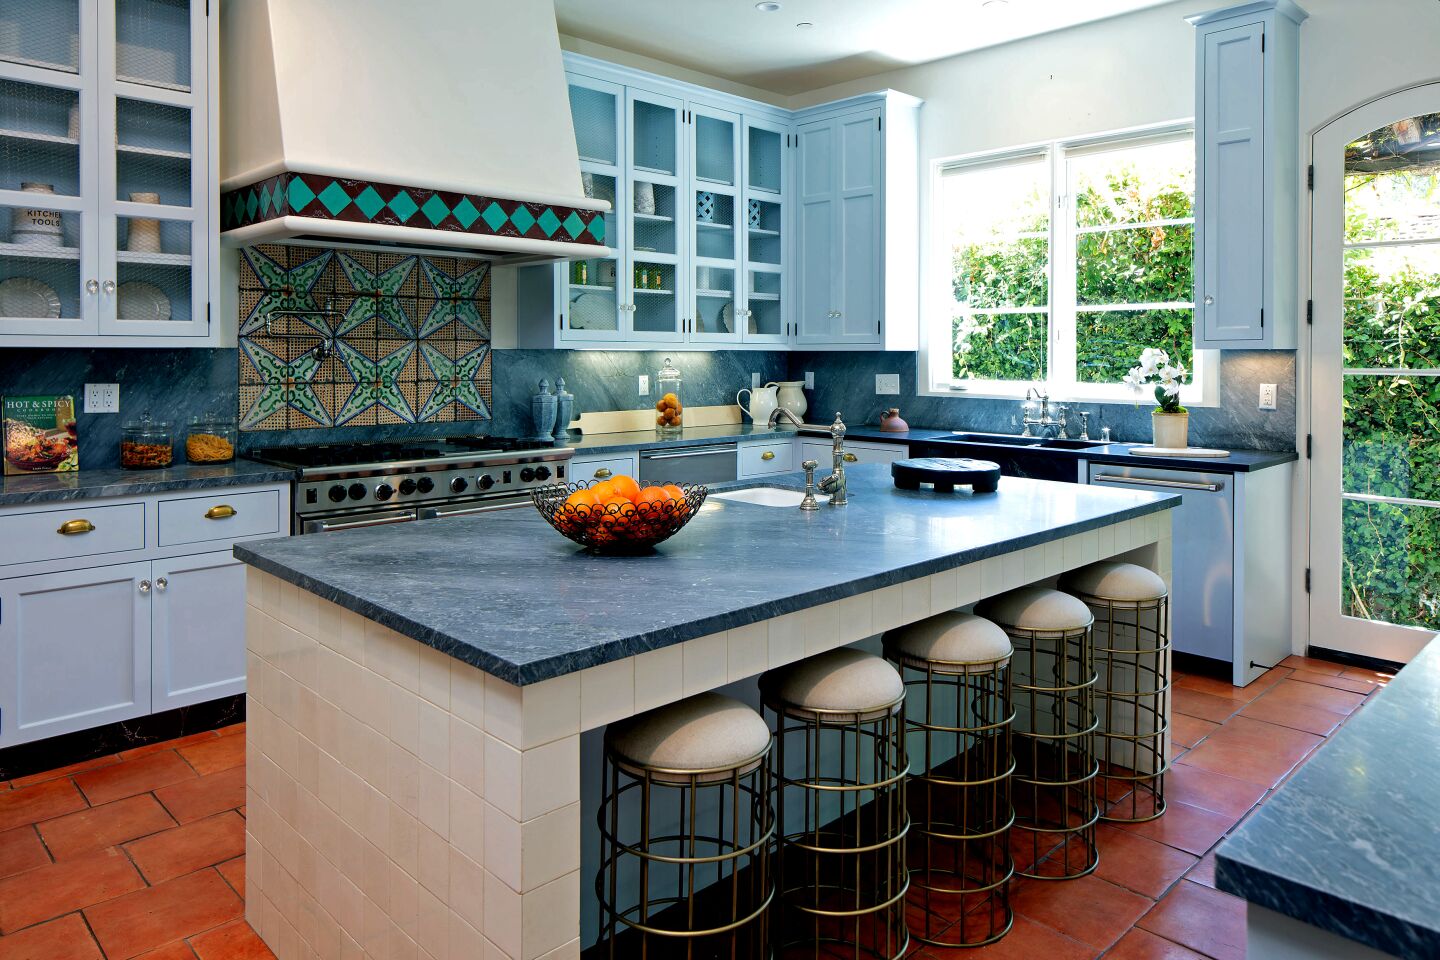 Blue-tinted stonework creates visual interest in the updated chef’s kitchen.